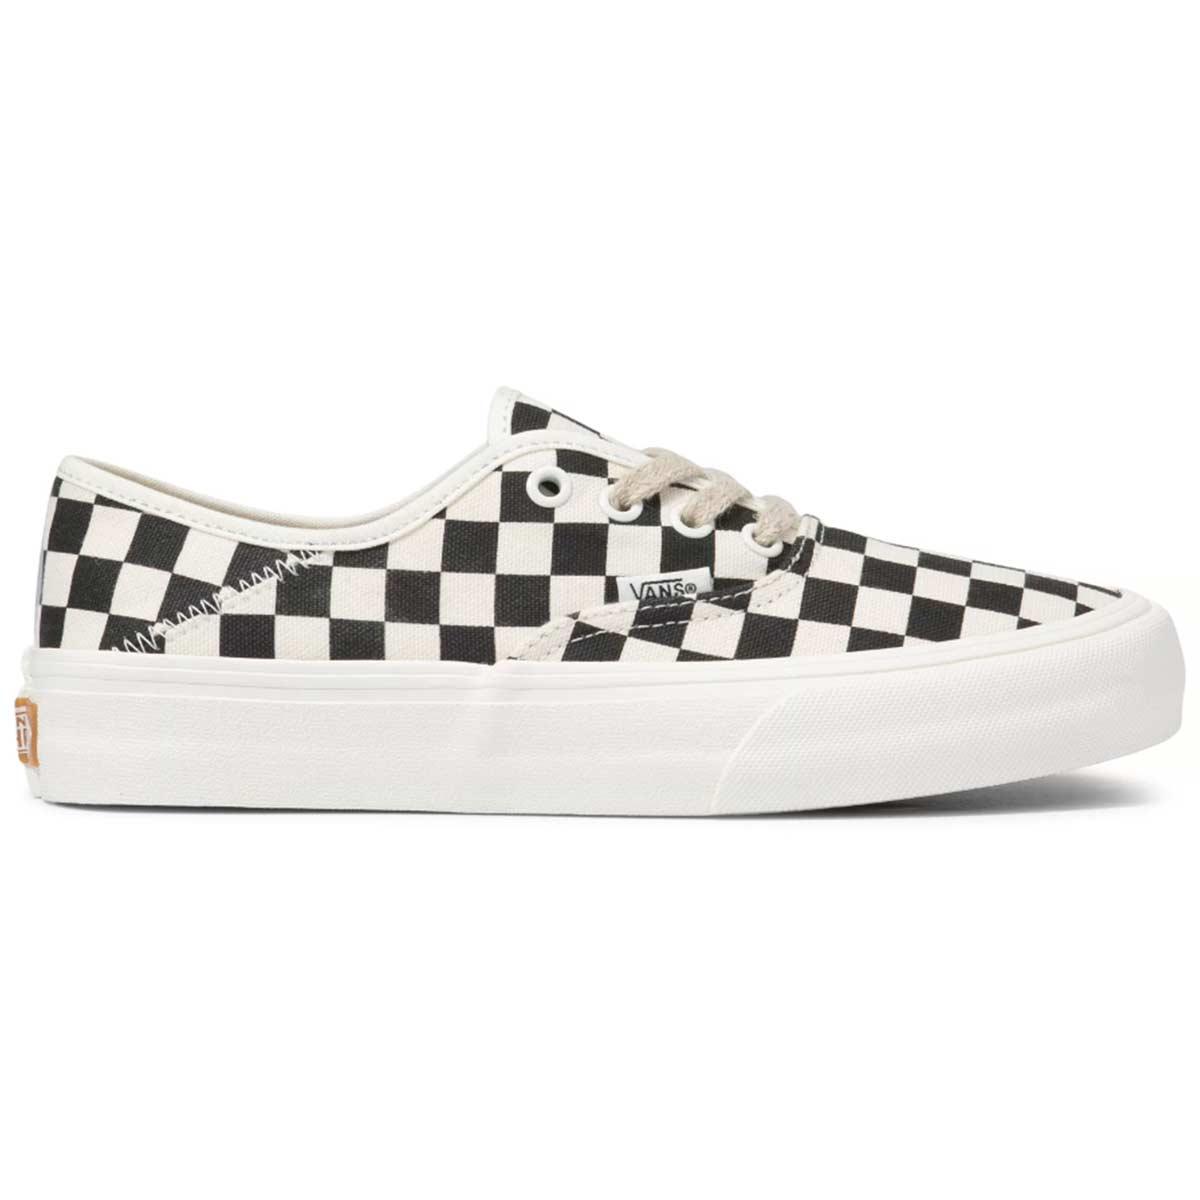 Vans Eco Theory Authentic SF Skate Shoes, Black Checkerboard/Marshmallow